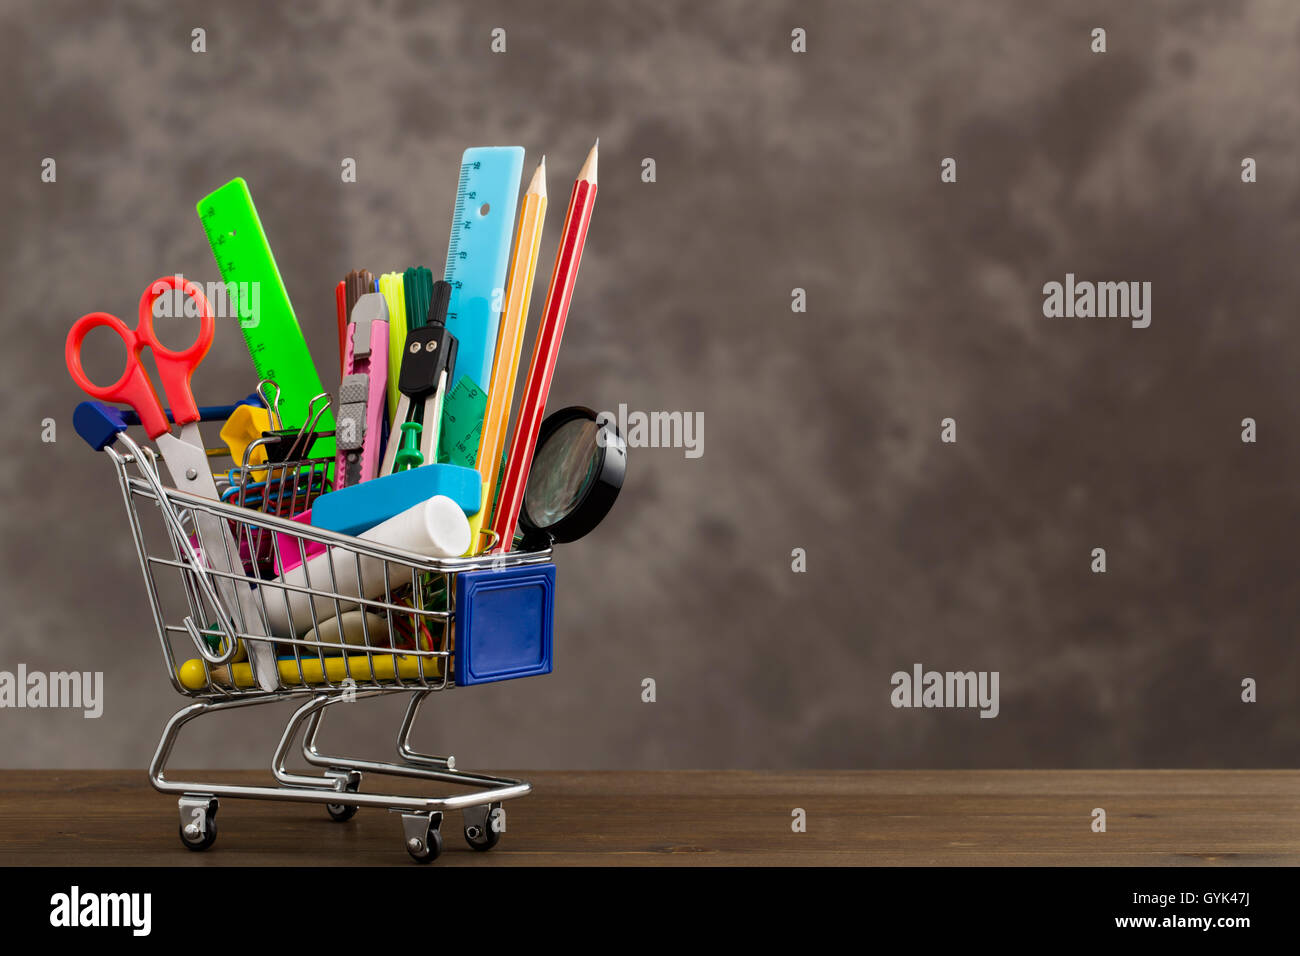 Stationery items in shopping trolley at left side Stock Photo